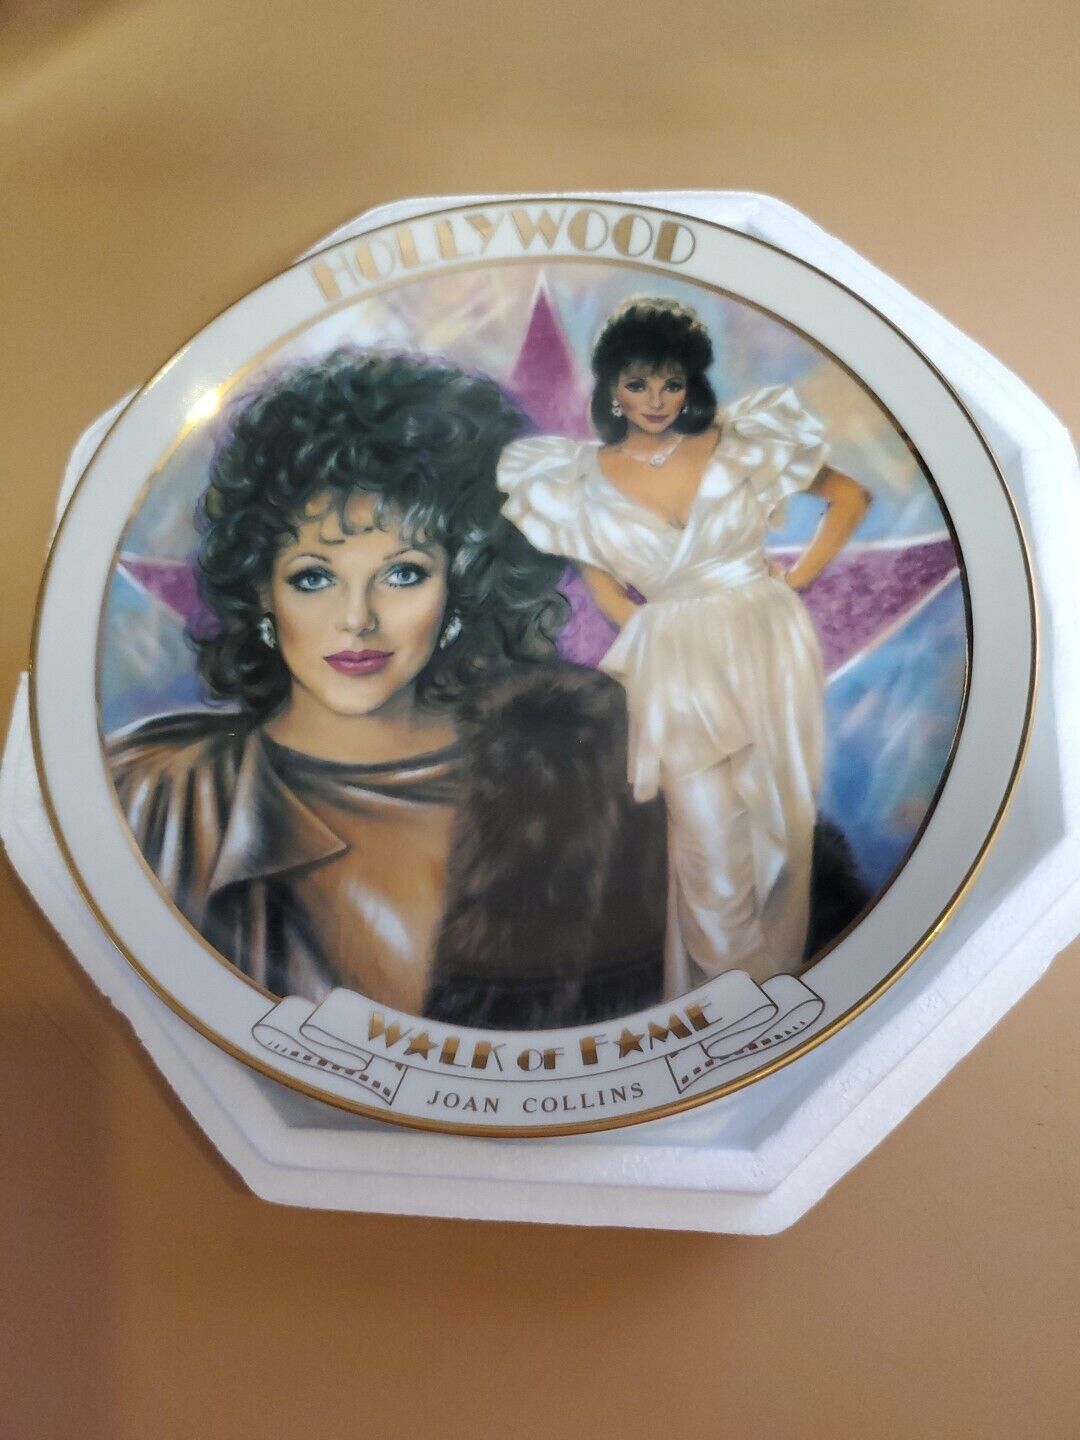 Joan Collins Hollywood Walk of Fame..Danbury Mint Limited Edition Mint Condition